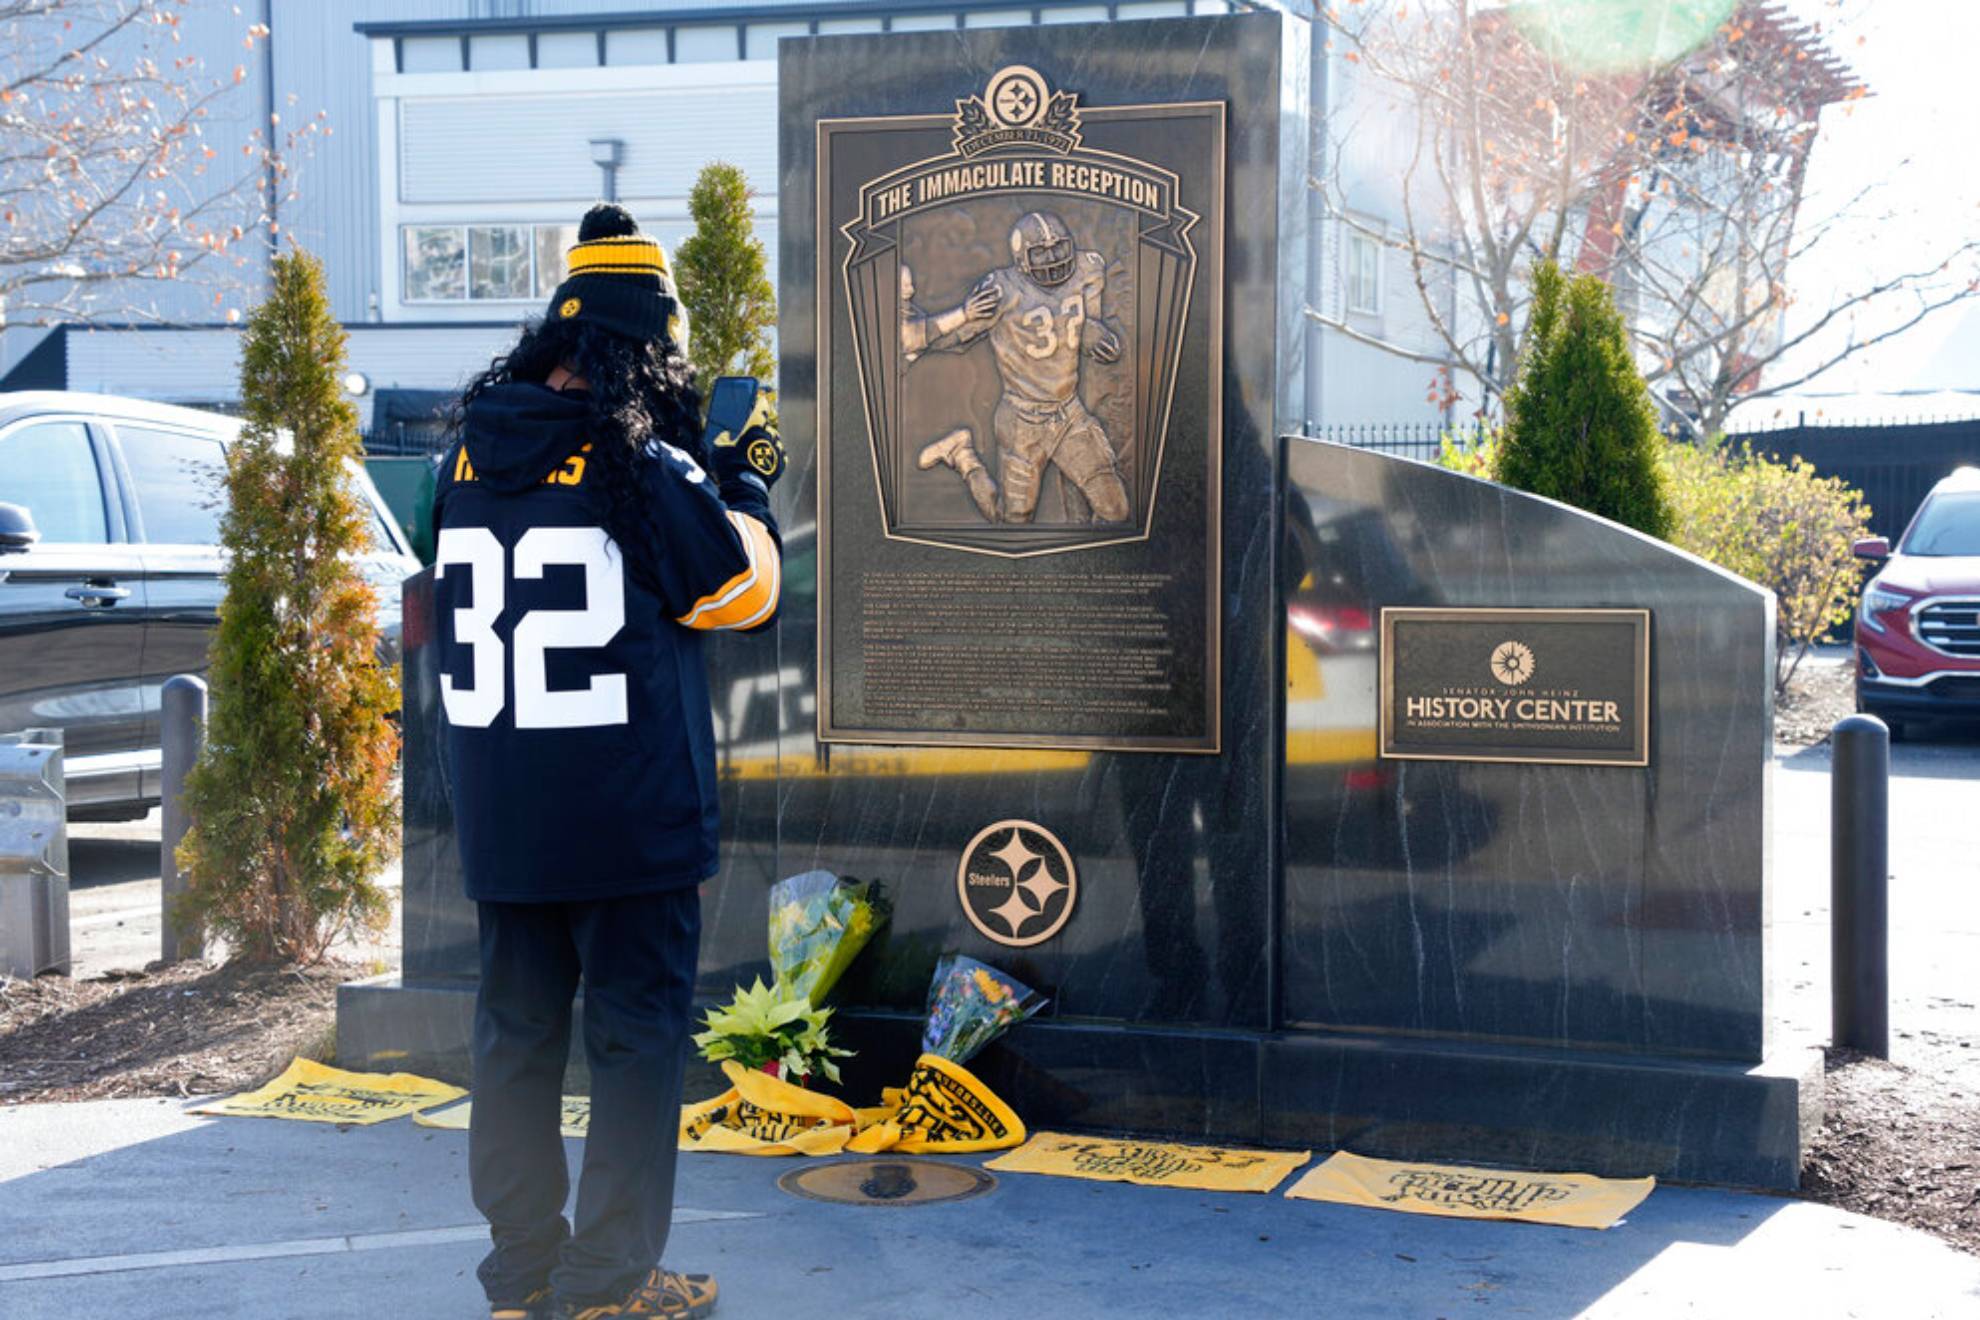 Steelers fans remember Harris' Immaculate Reception days before his death